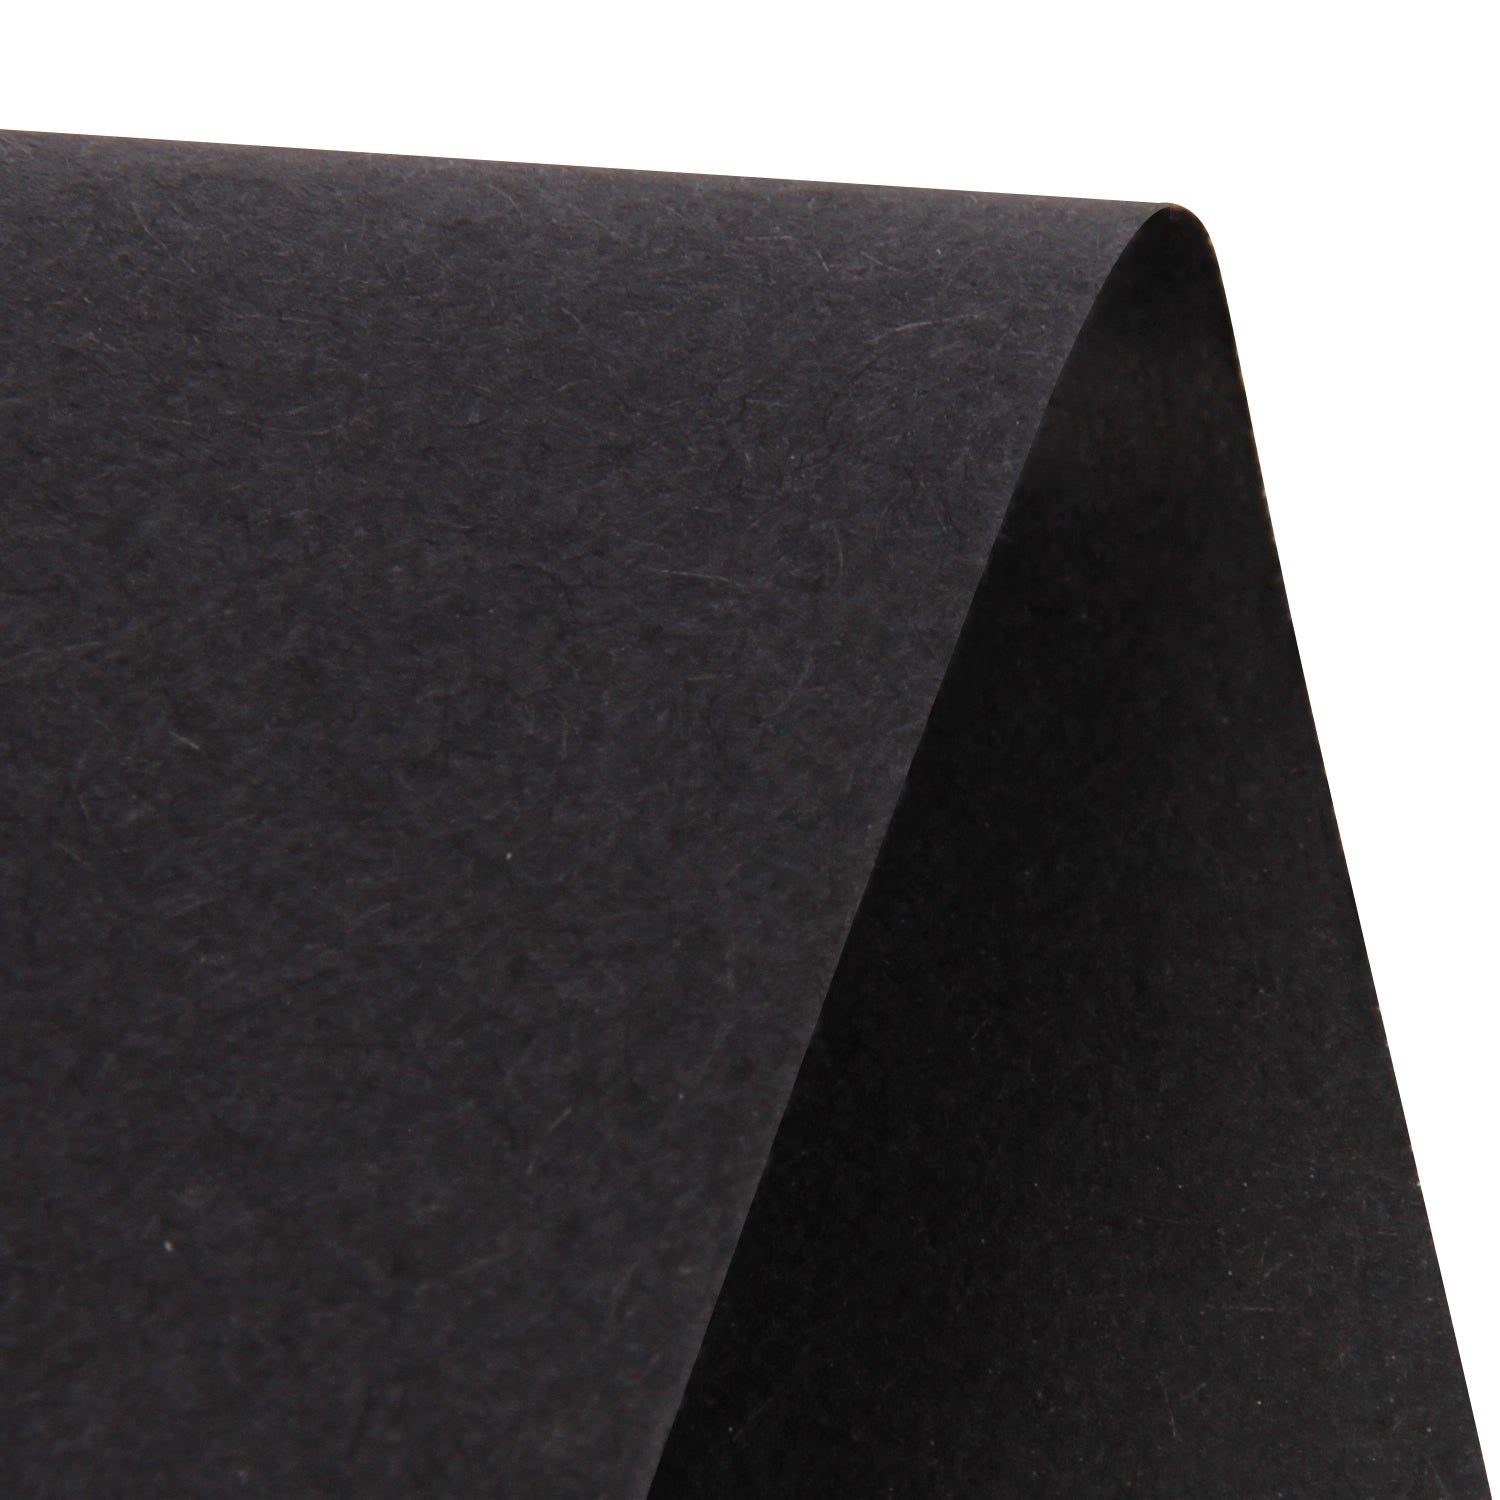  RUSPEPA Black Kraft Paper Roll - 18 inches x 100 feet -  Recyclable Paper Perfect for for Crafts, Art, Wrapping, Packing, Postal,  Shipping, Dunnage & Parcel : Health & Household